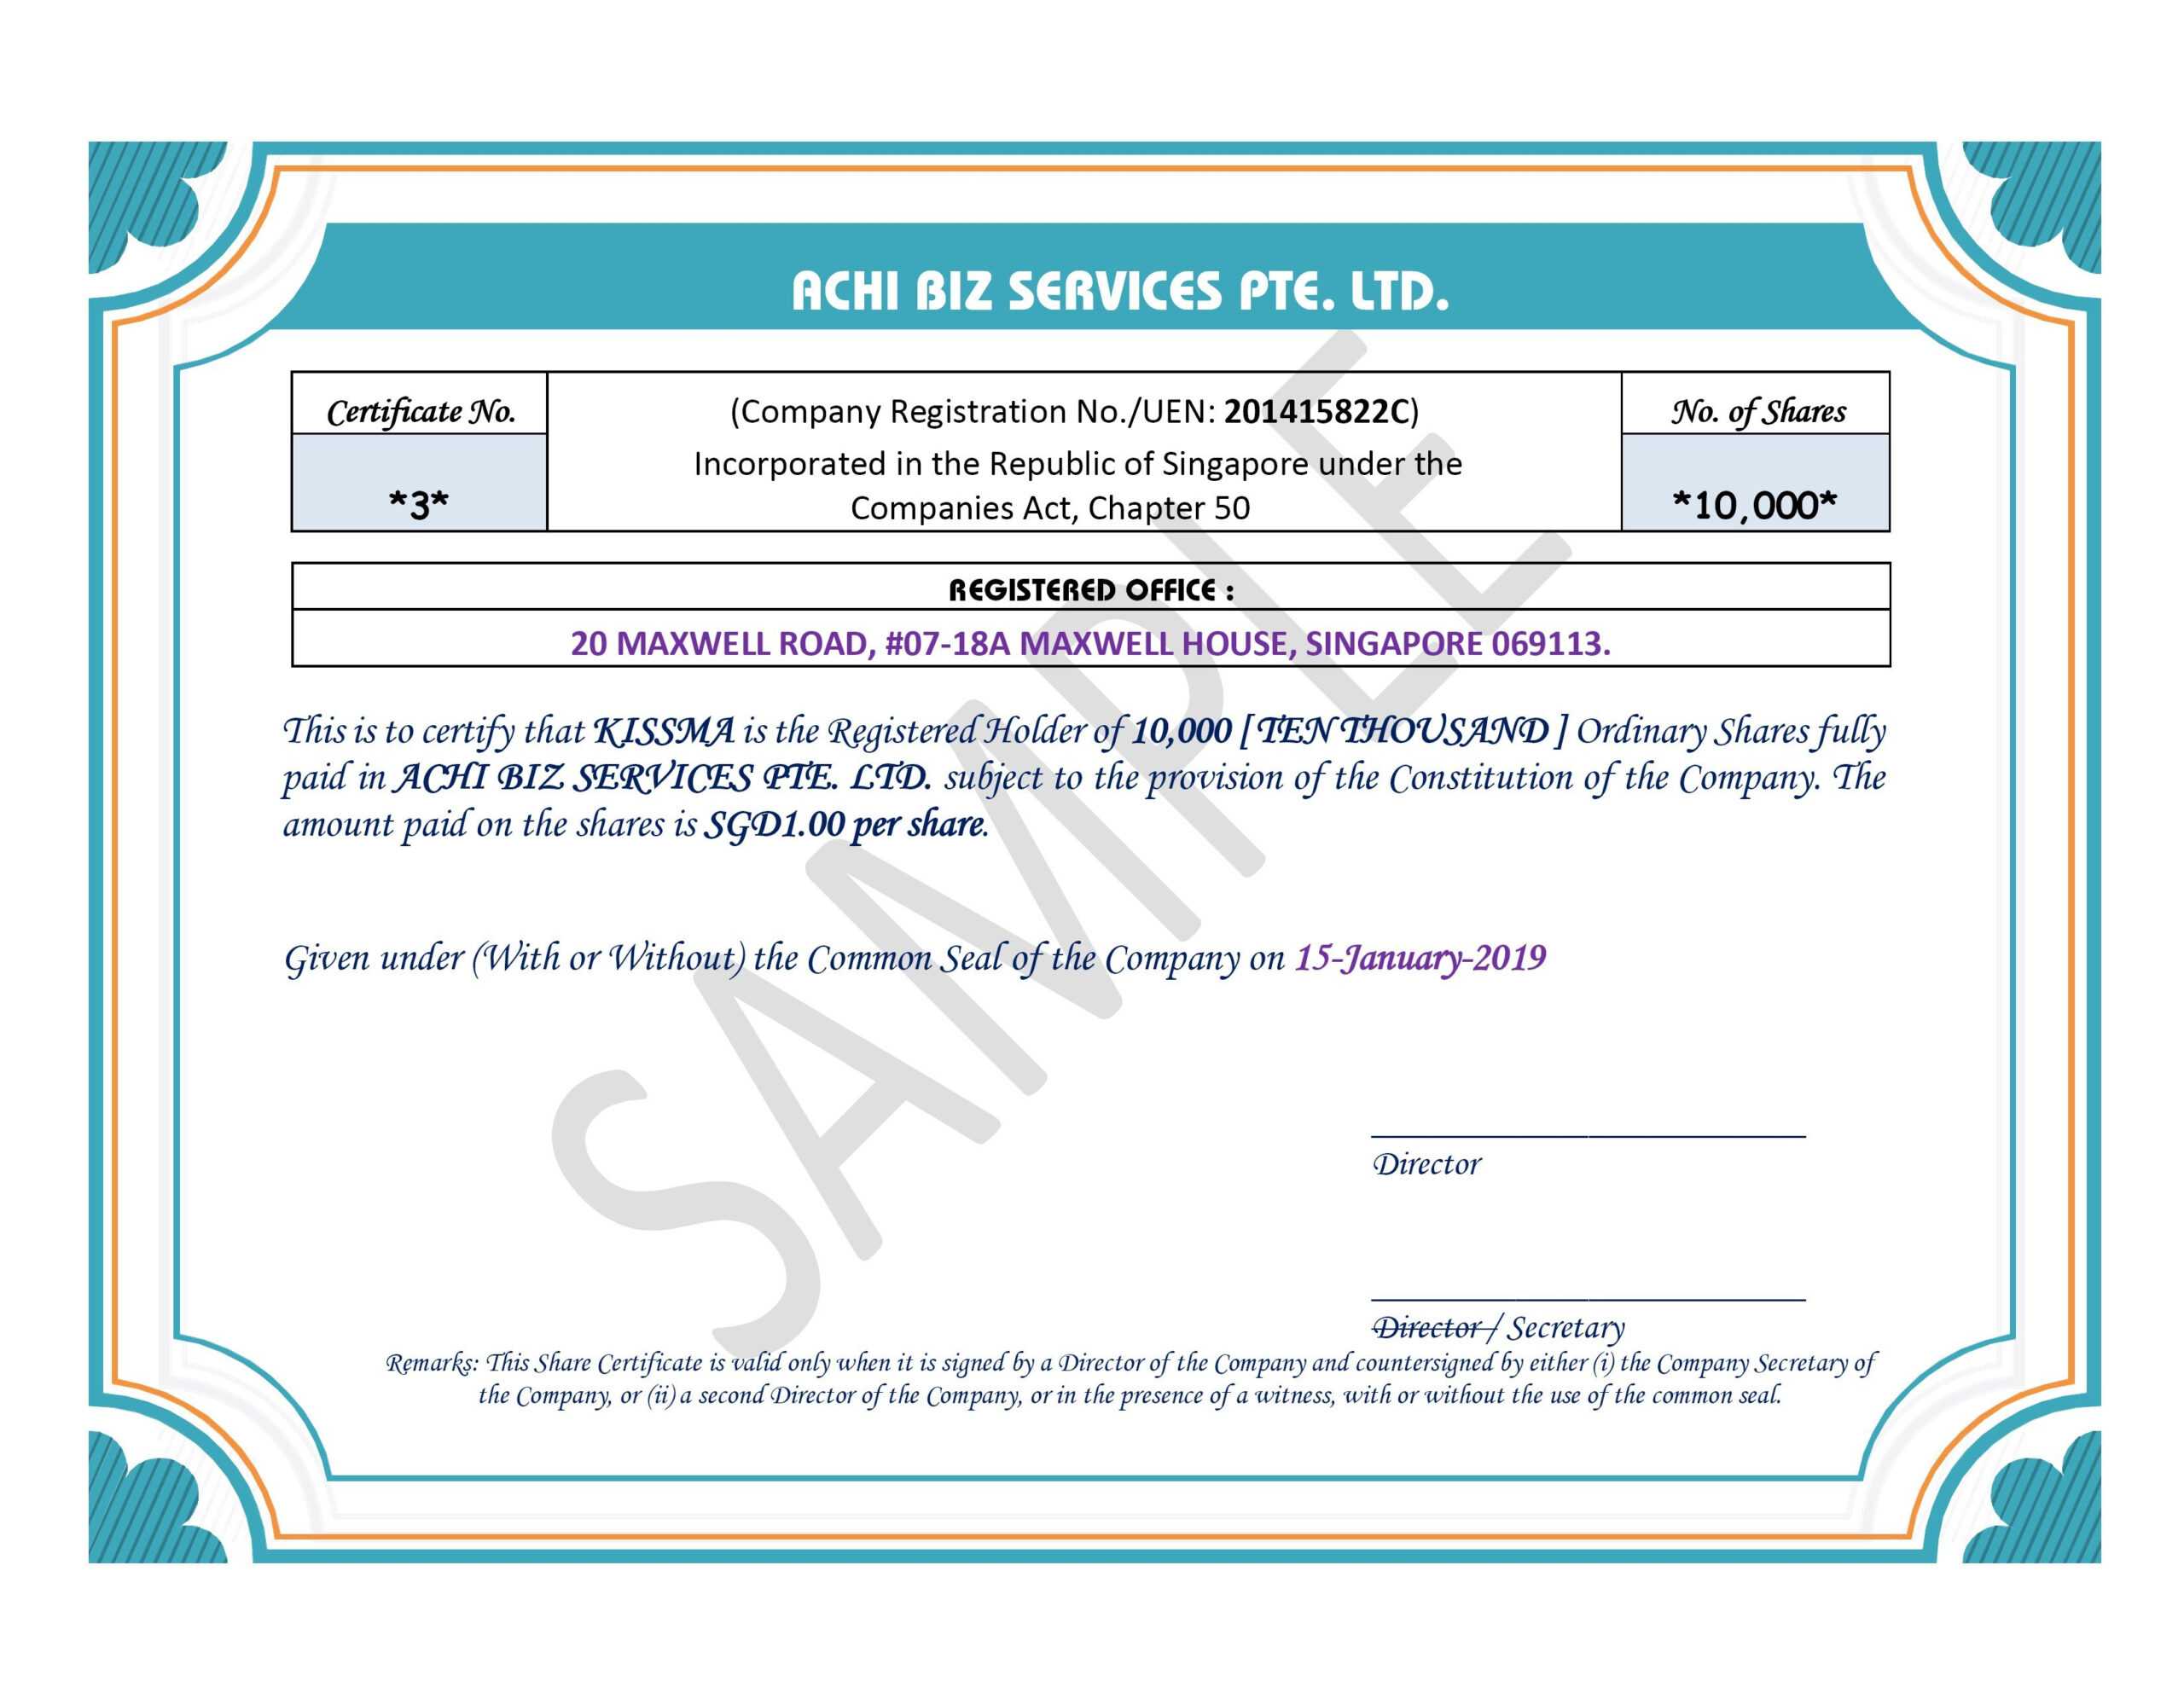 Share Certificate In Singapore ~ Achibiz Within Share Certificate Template Companies House